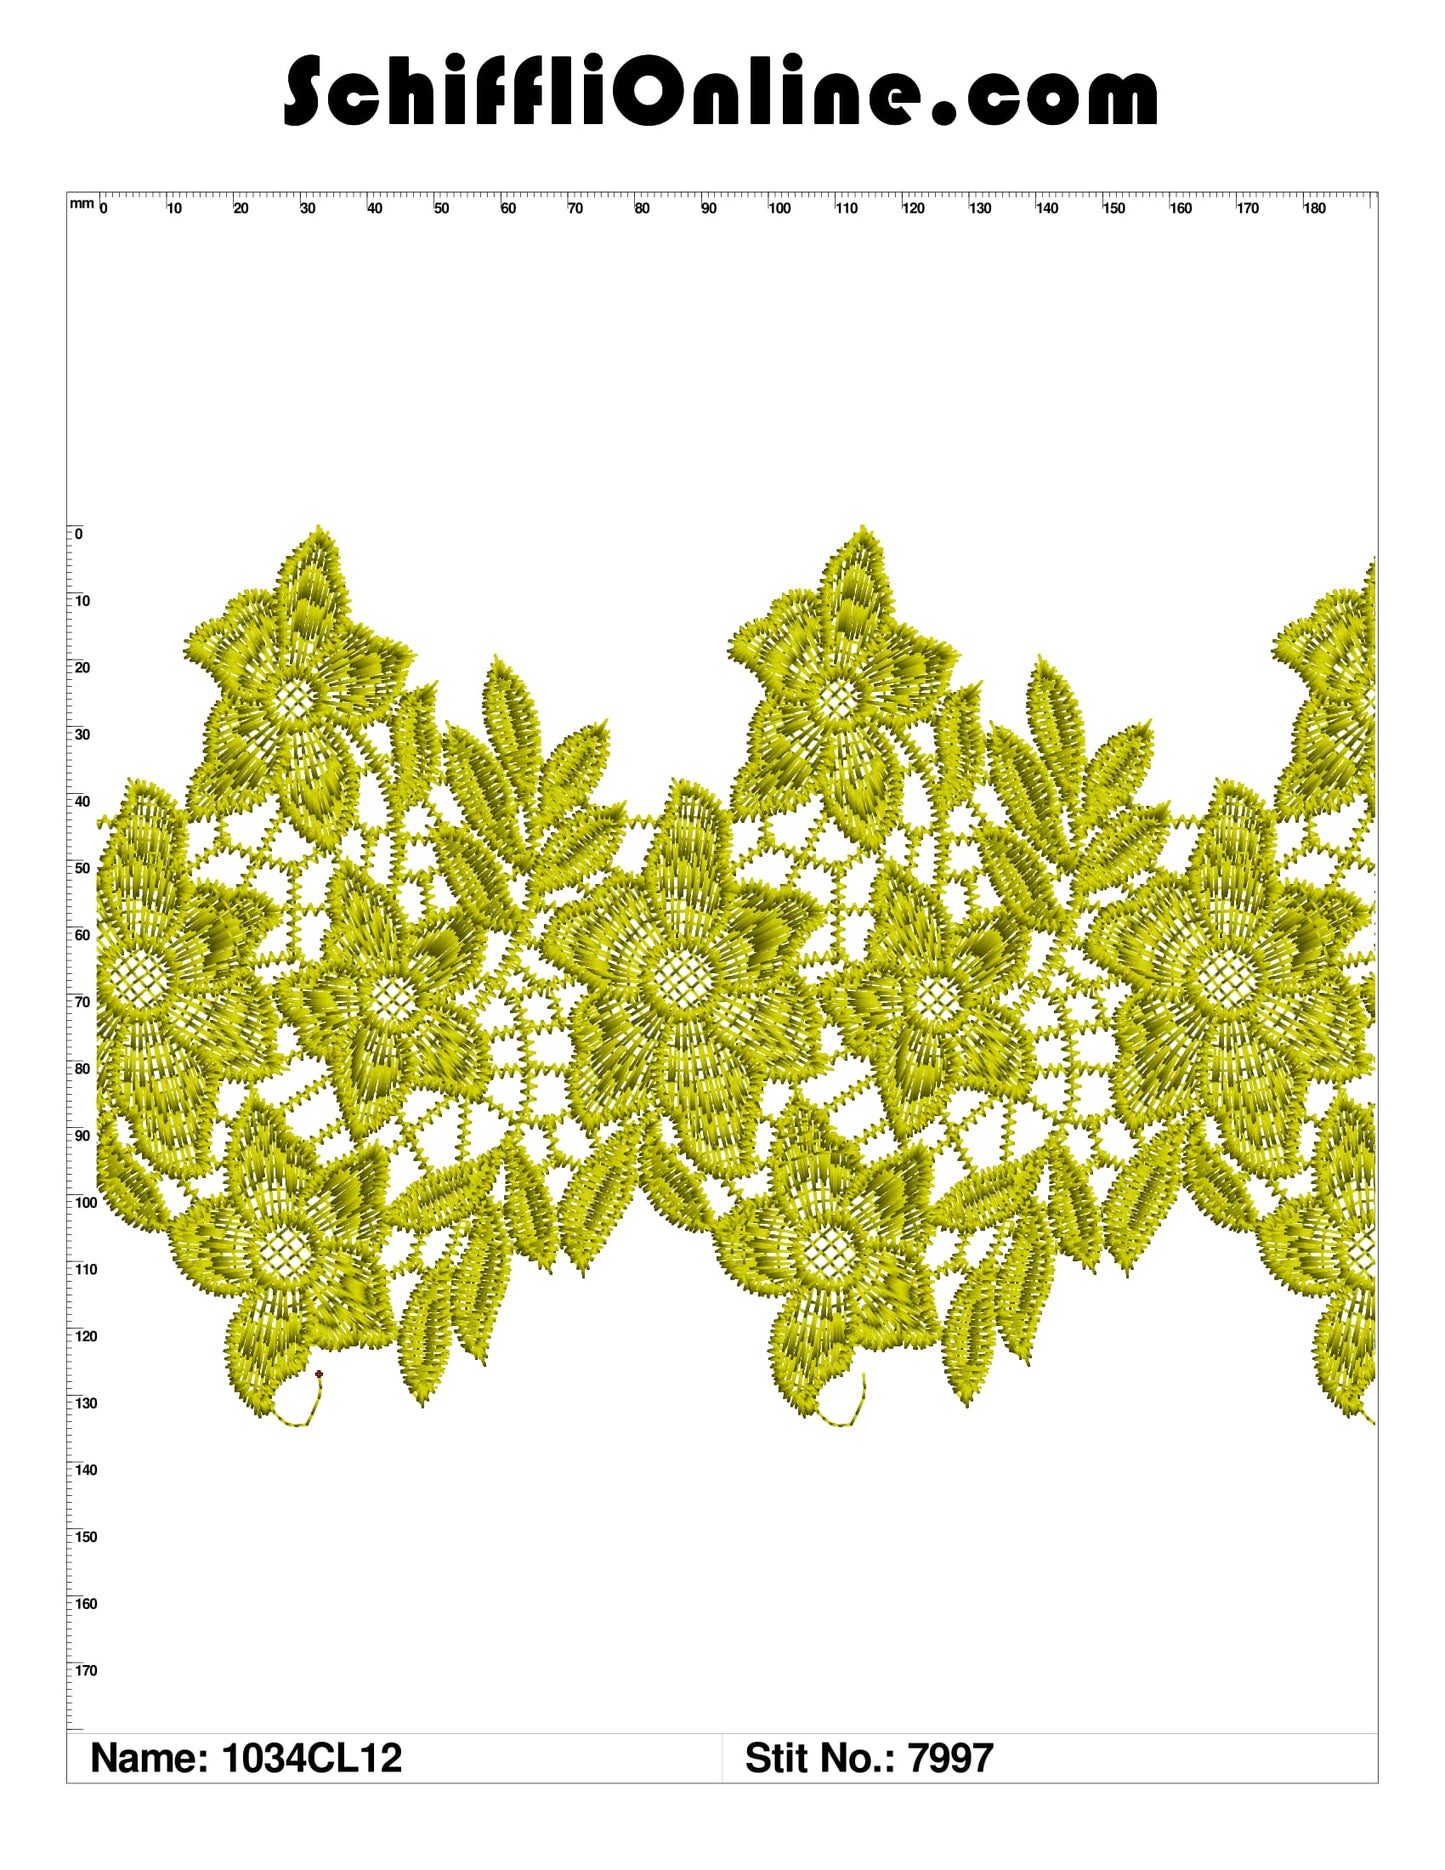 Book 146 CHEMICAL LACE 12X4 50 DESIGNS